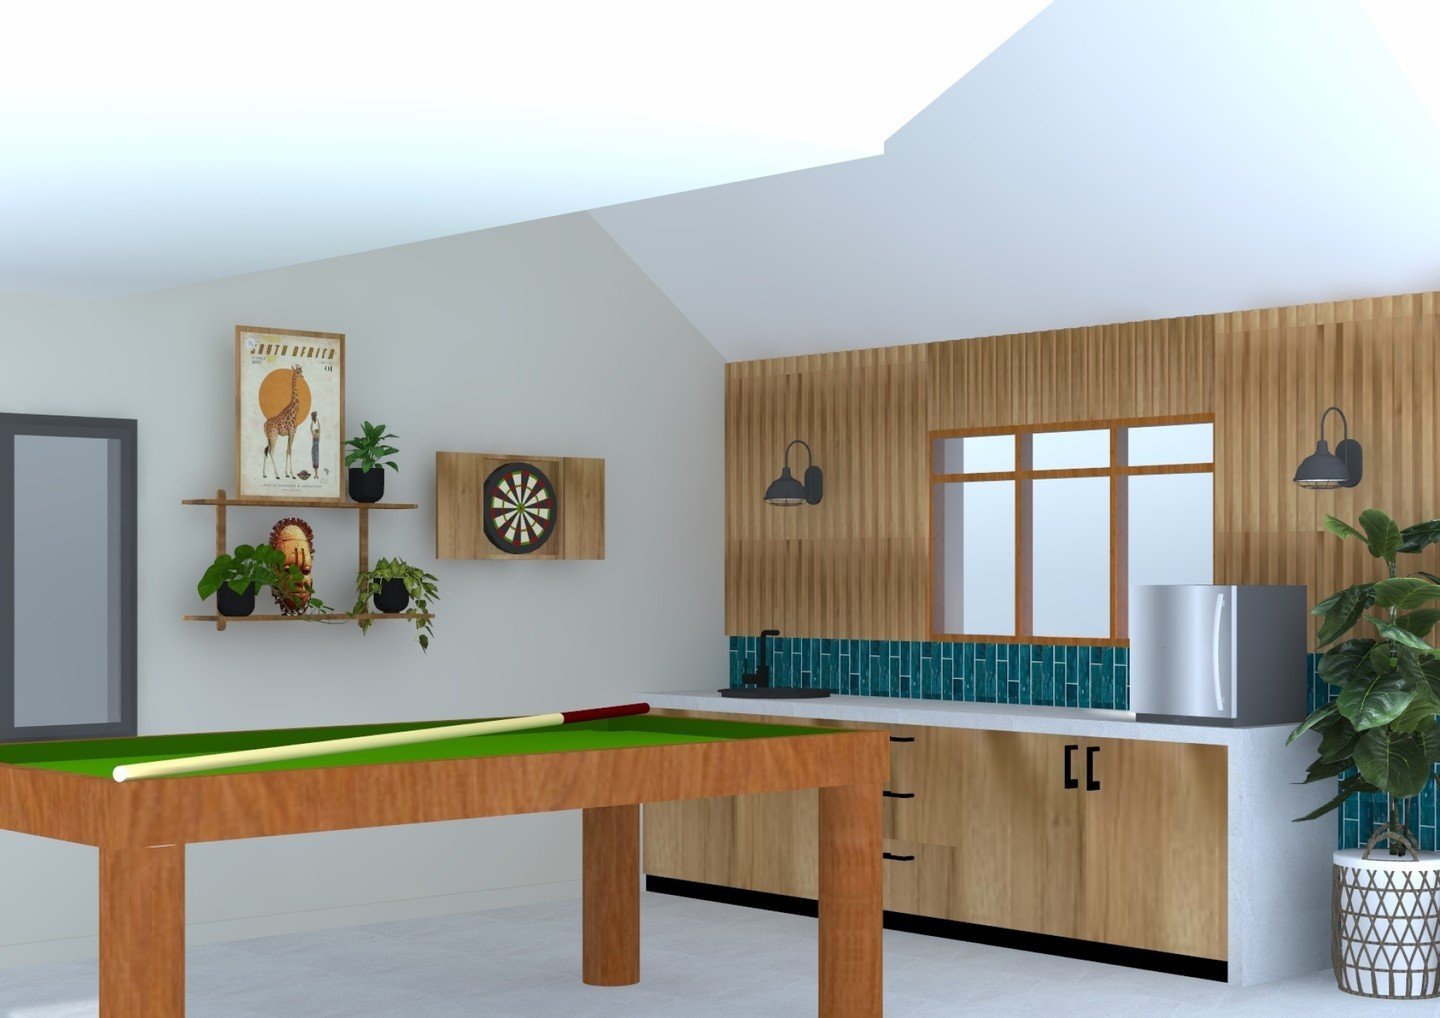 Creative Visuals for a indoor patio/games room.